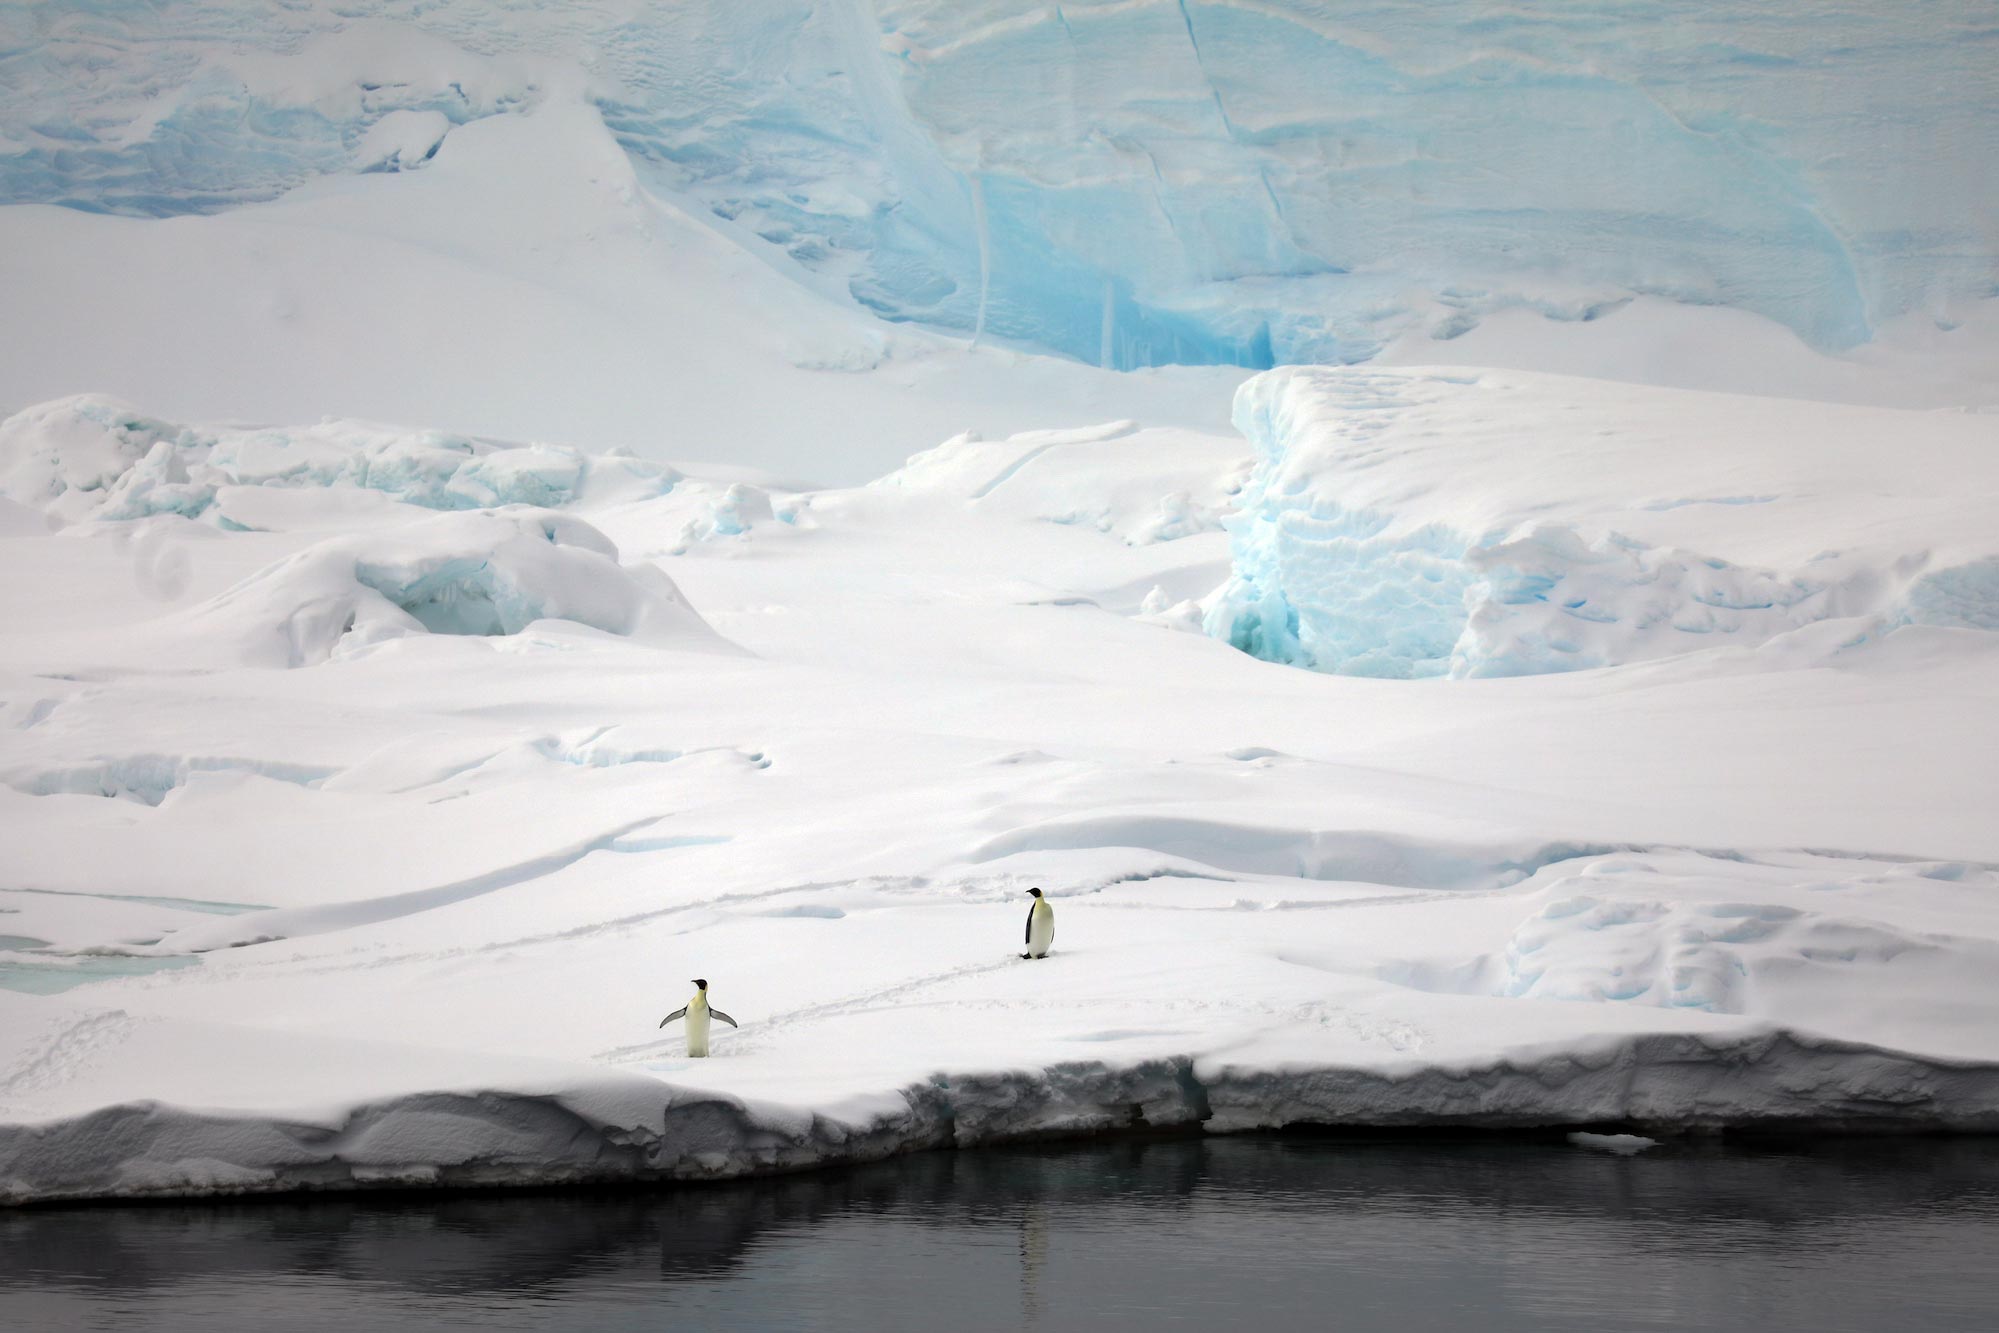 Two emperor penguins walk along the icy edge of a glacier